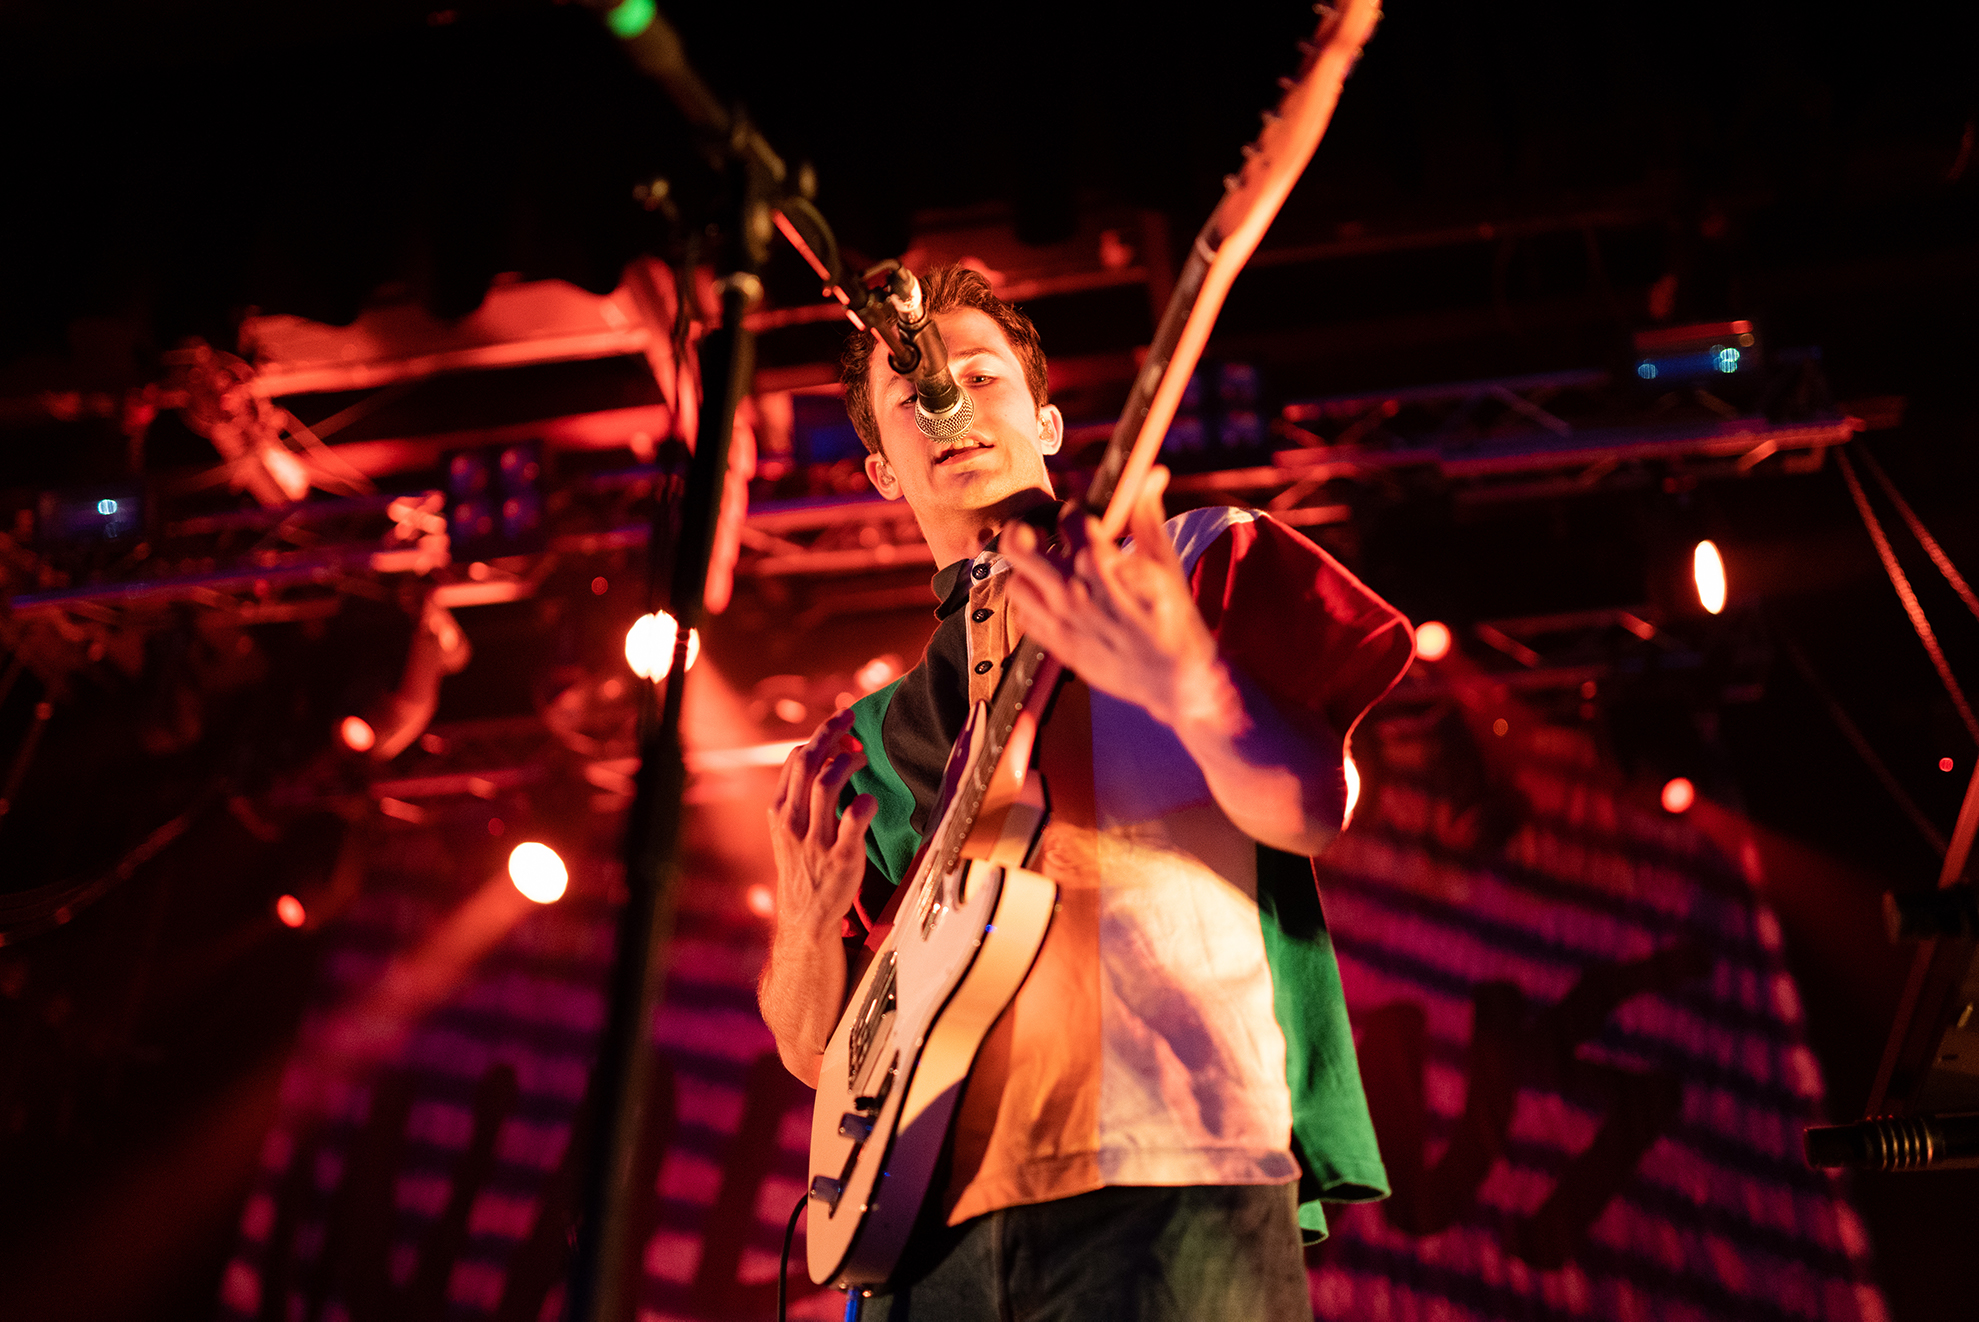 Wallows - Electric Brixton - 06_06_19 - Milly McAlister 12.jpg